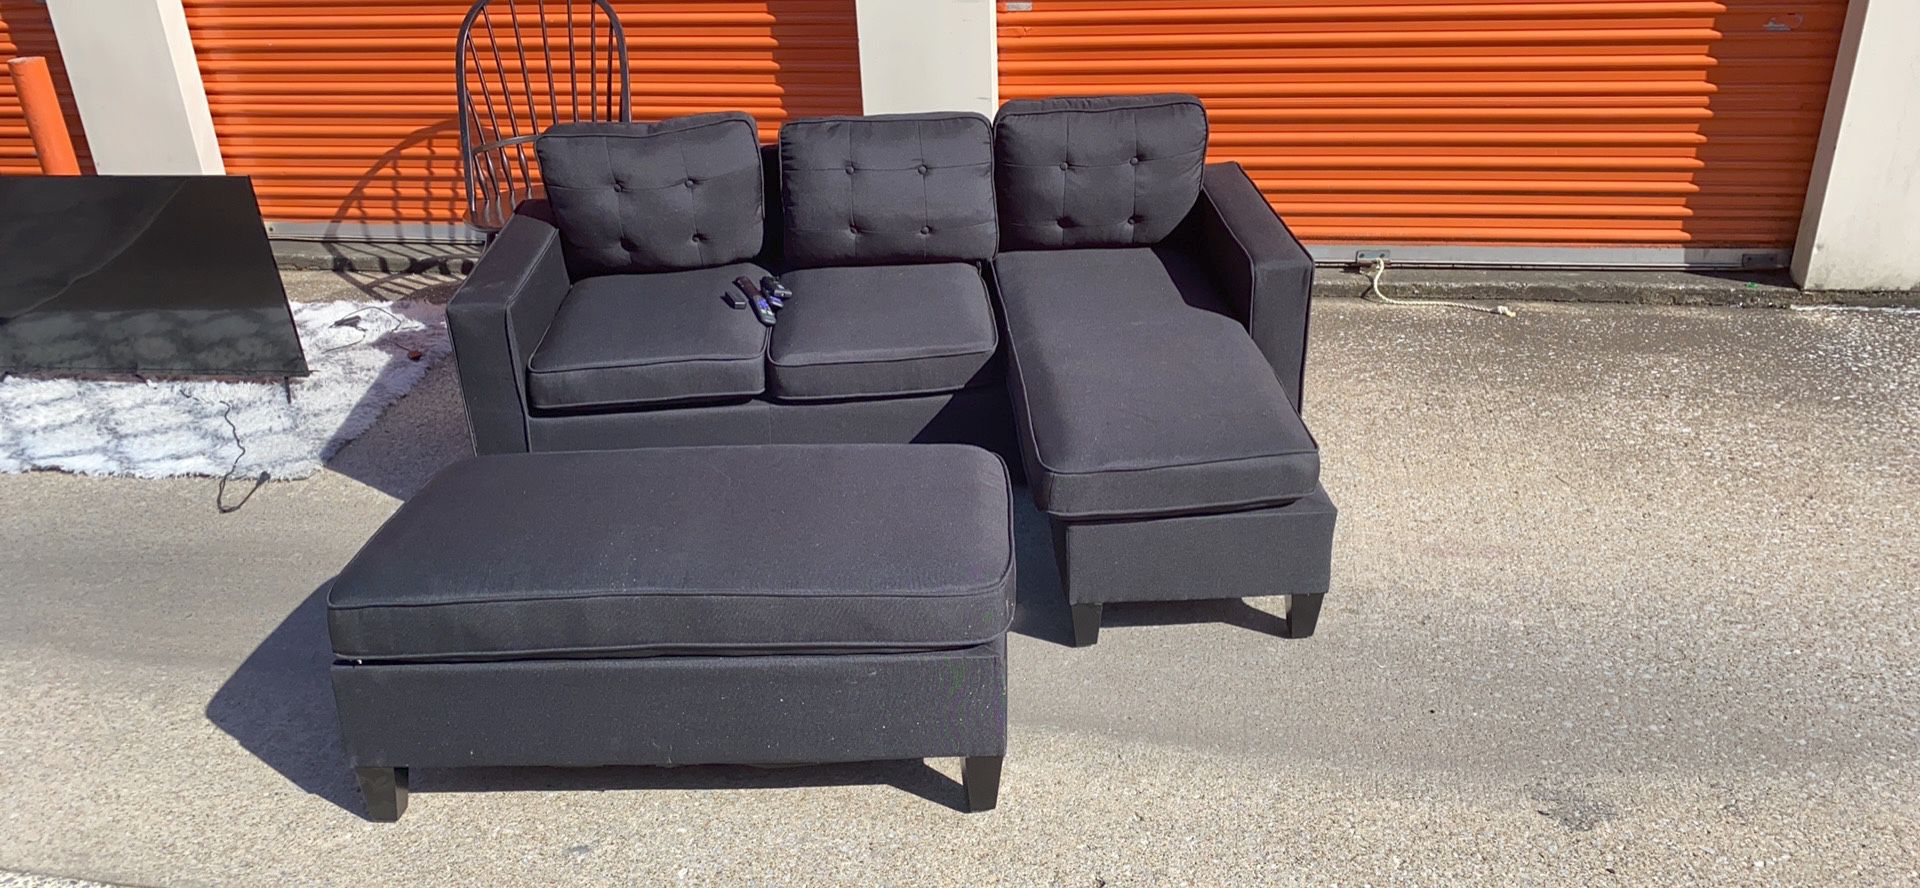 BLACK COUCH WITH OTTOMAN LIKE NEW